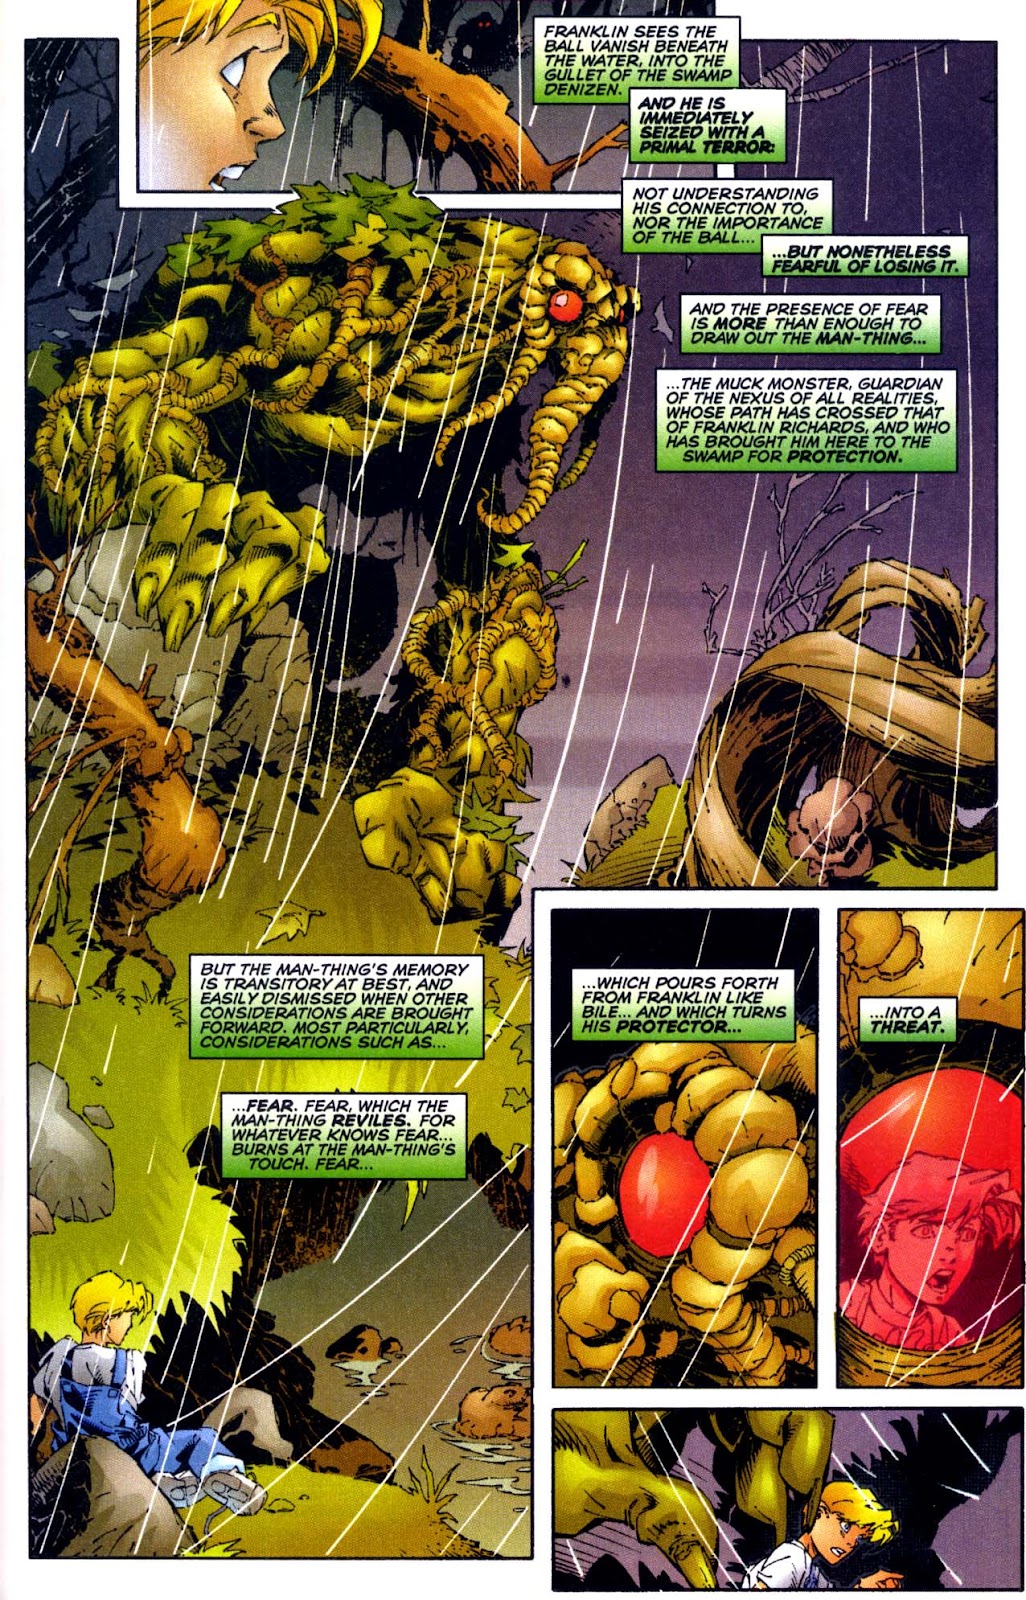 Heroes Reborn: The Return issue 1 - Page 12